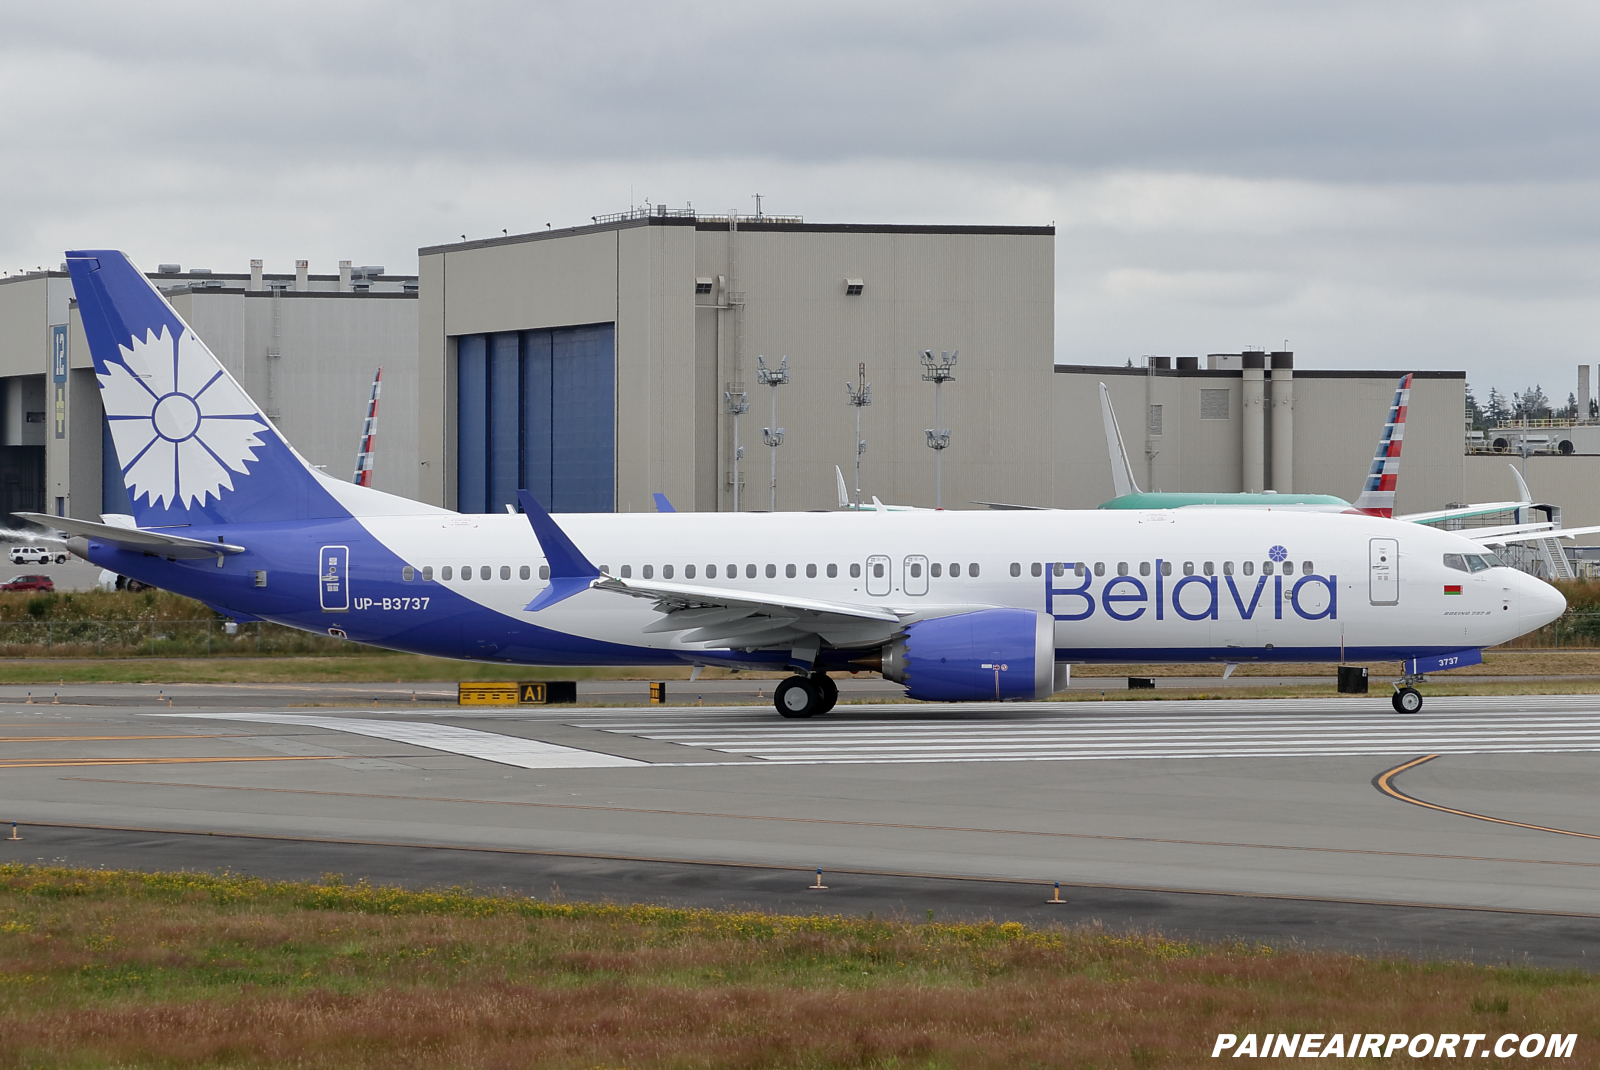 Belavia 737 UP-B3737 at KPAE Paine Field